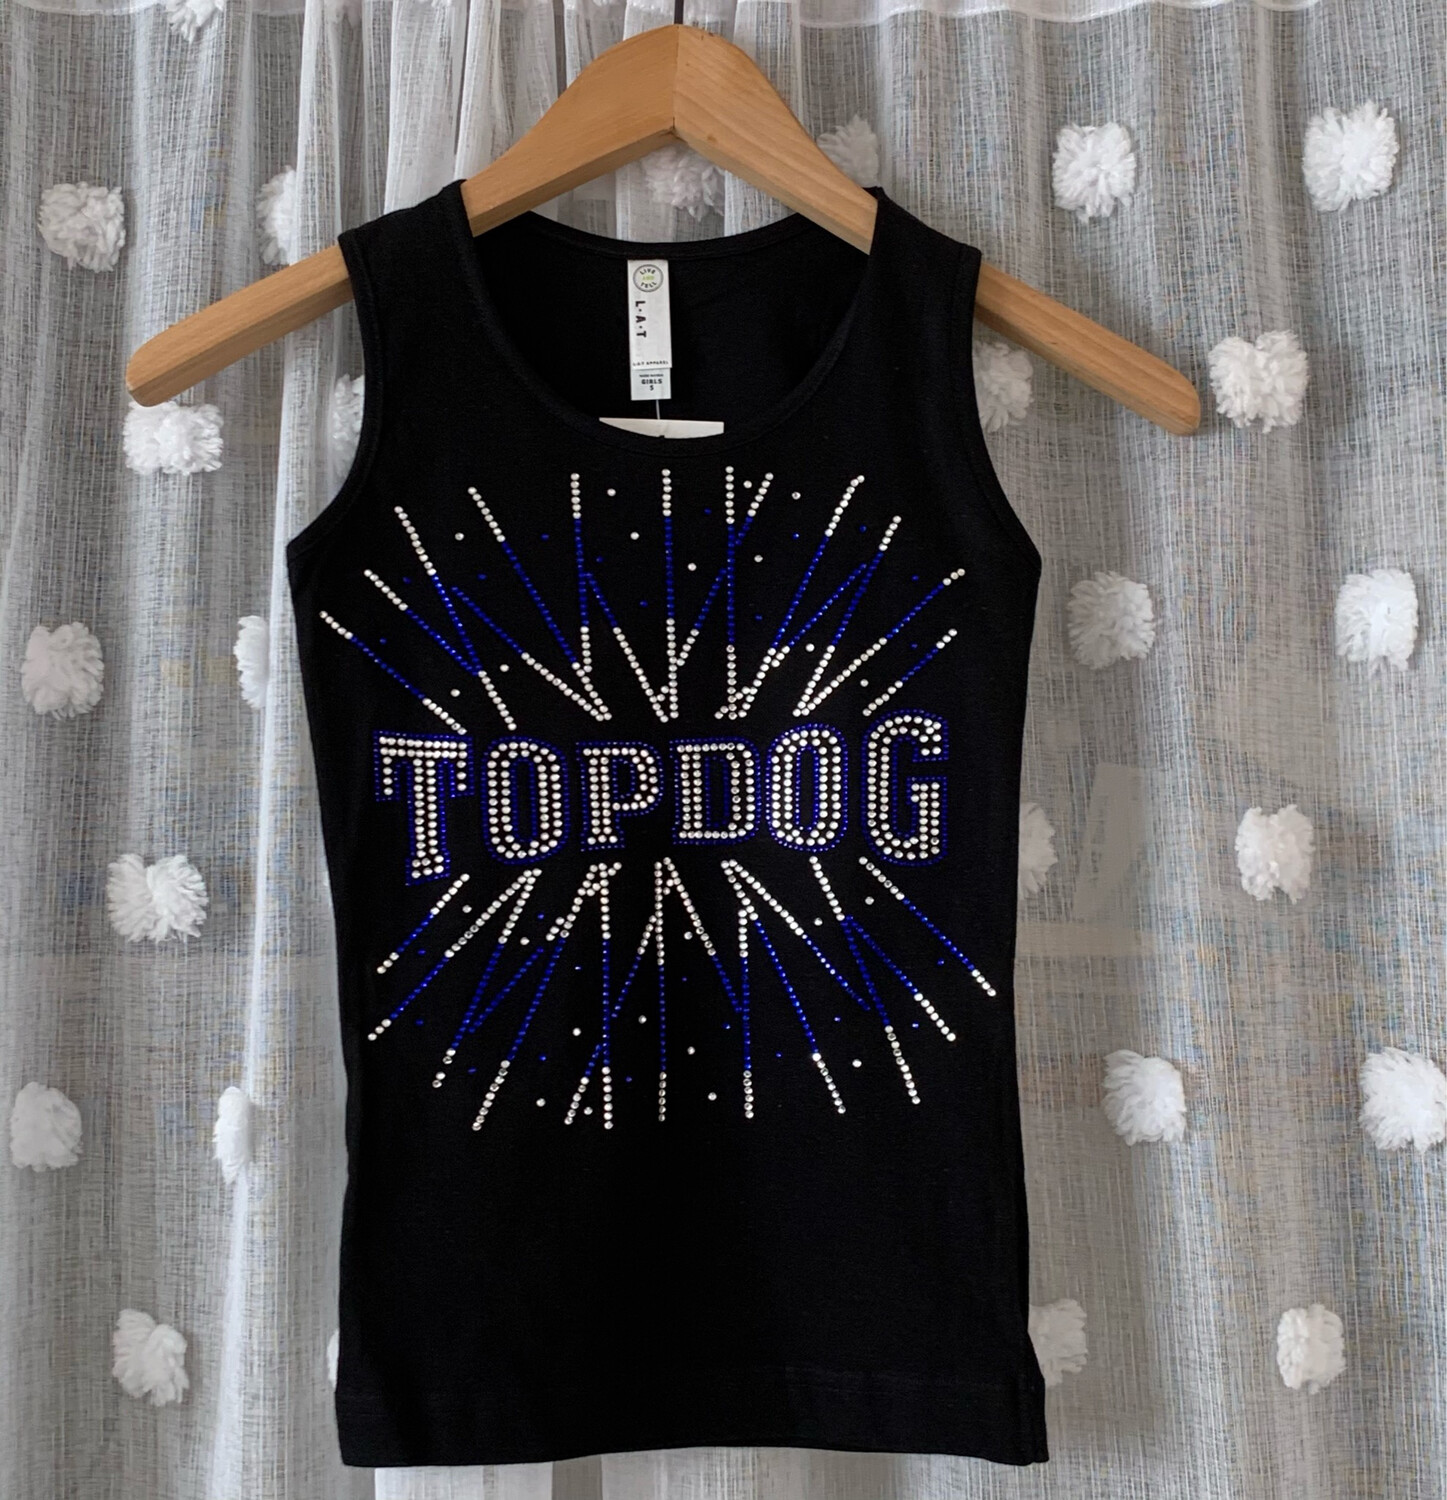 Rhinestone Top Dog Tank - Perfect for Try Outs, Practice or Spirit Wear!